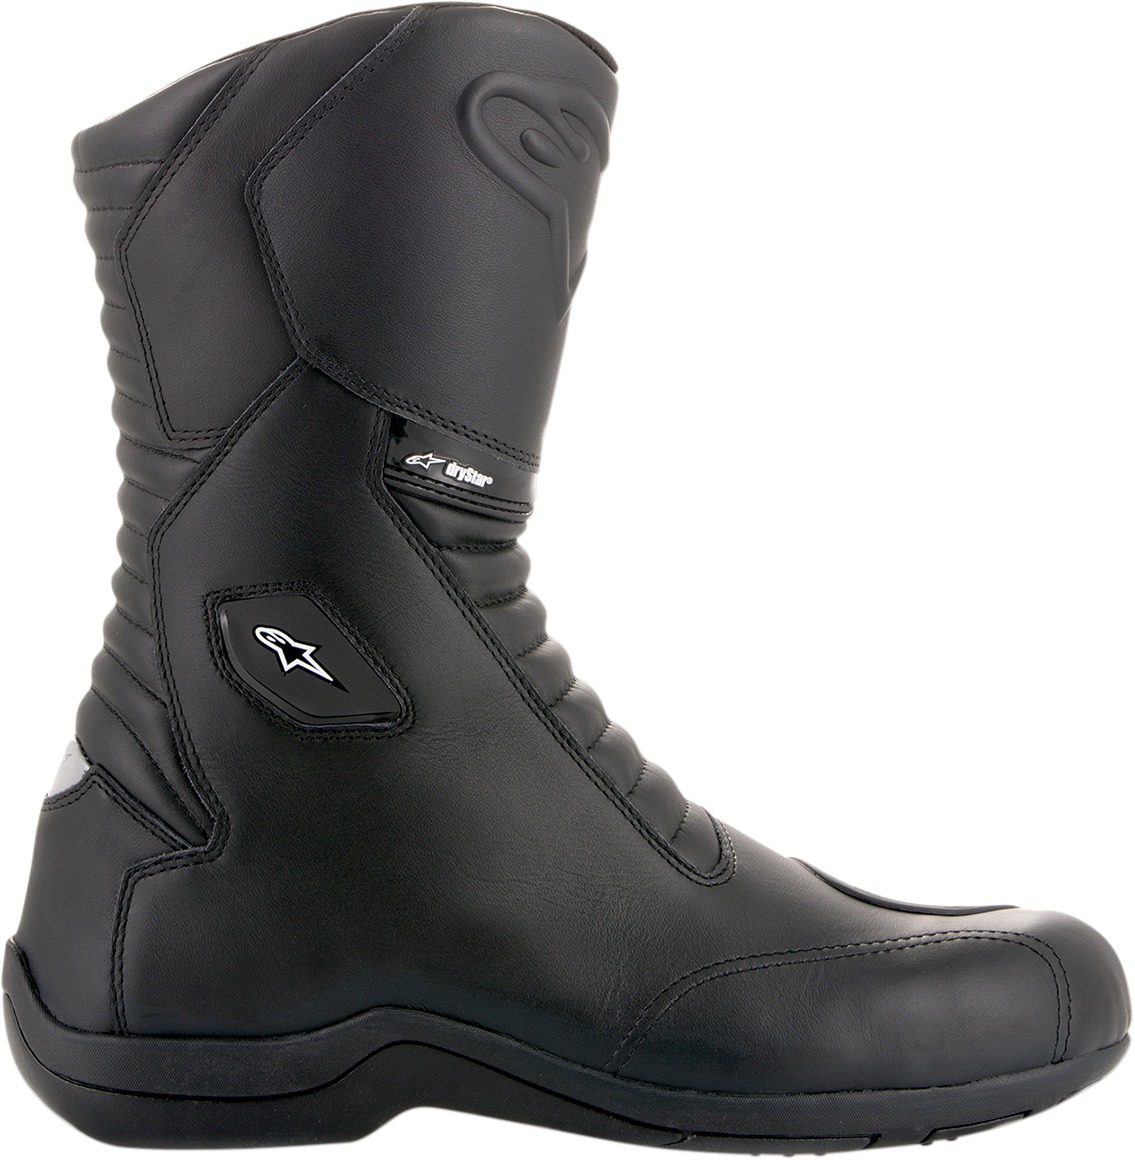 Andes V2 Drystar Street Riding Boots Black US 9 - Click Image to Close